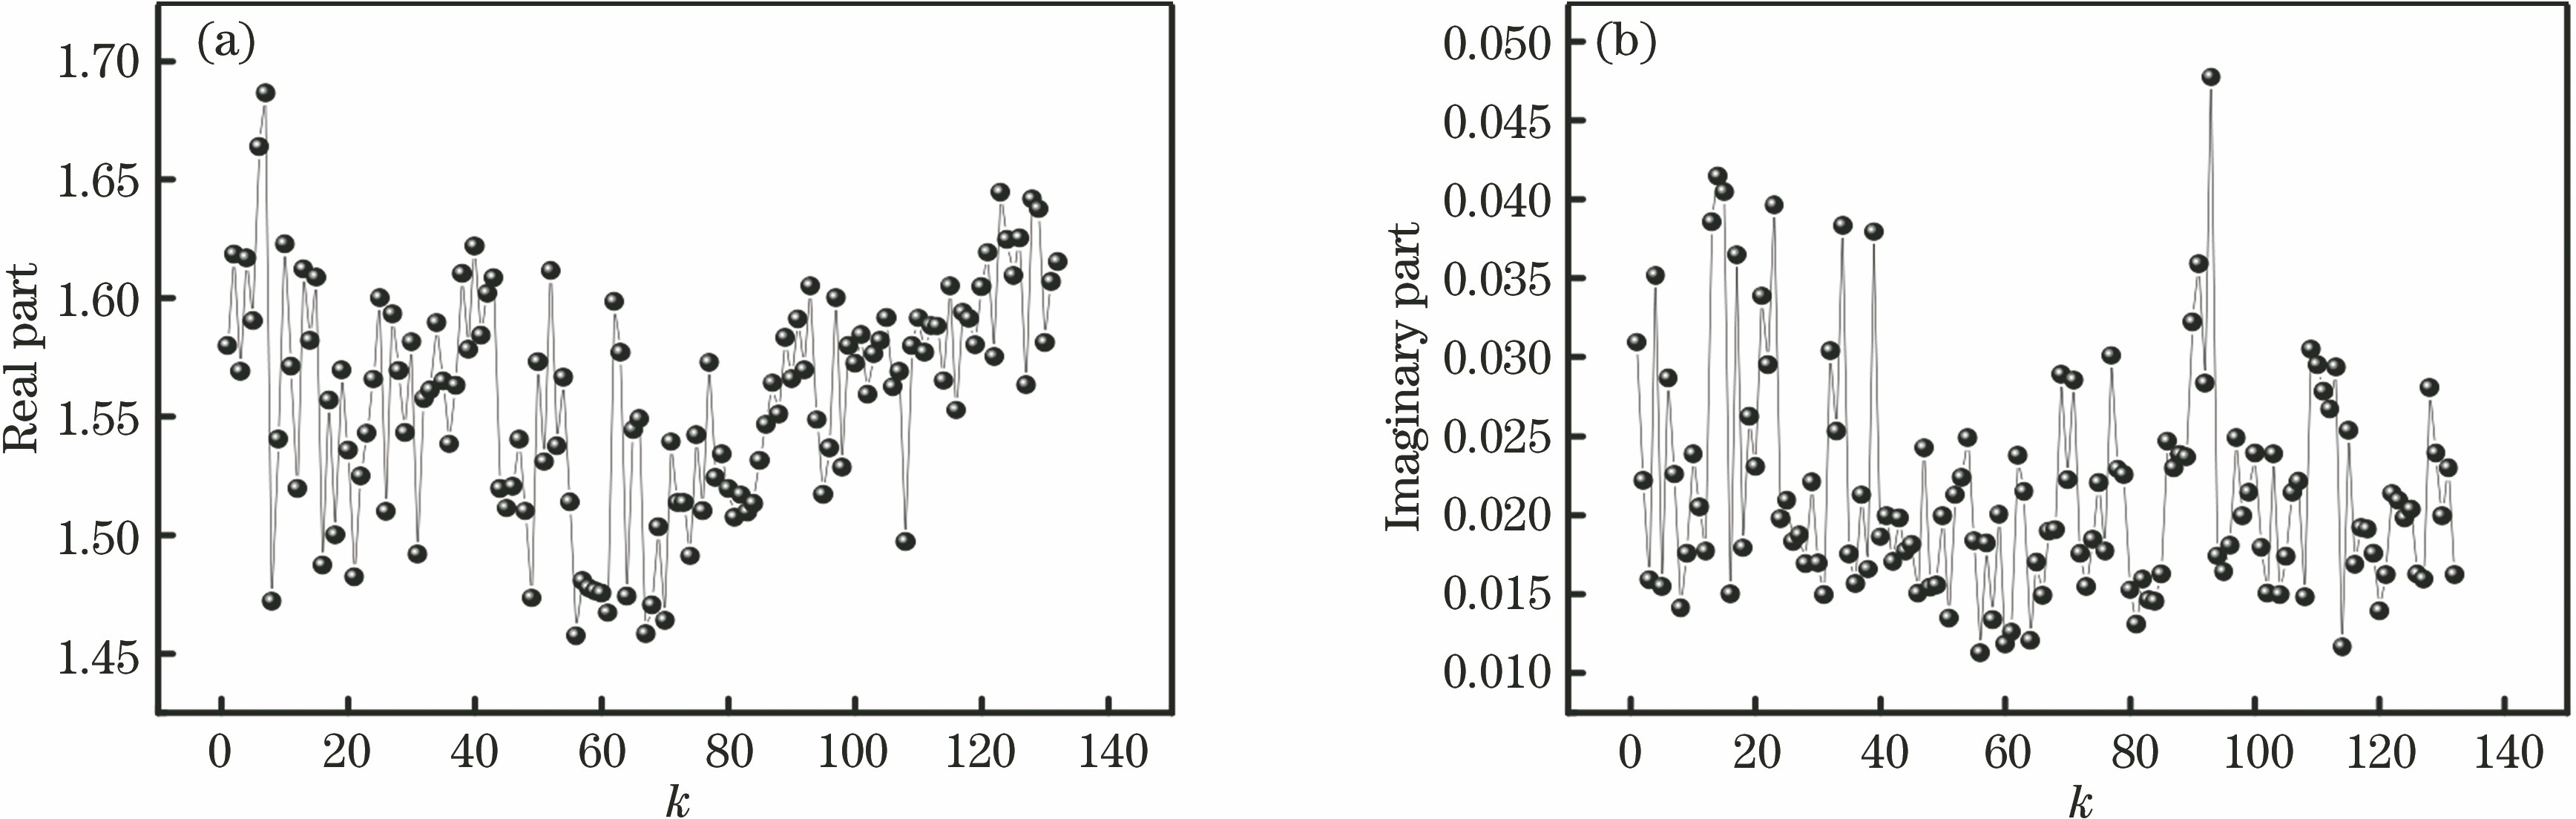 Time sequences of real part (nre) and imaginary part (ni) of equivalent complex refractive index of “dry” aerosol. (a) nre; (b) ni